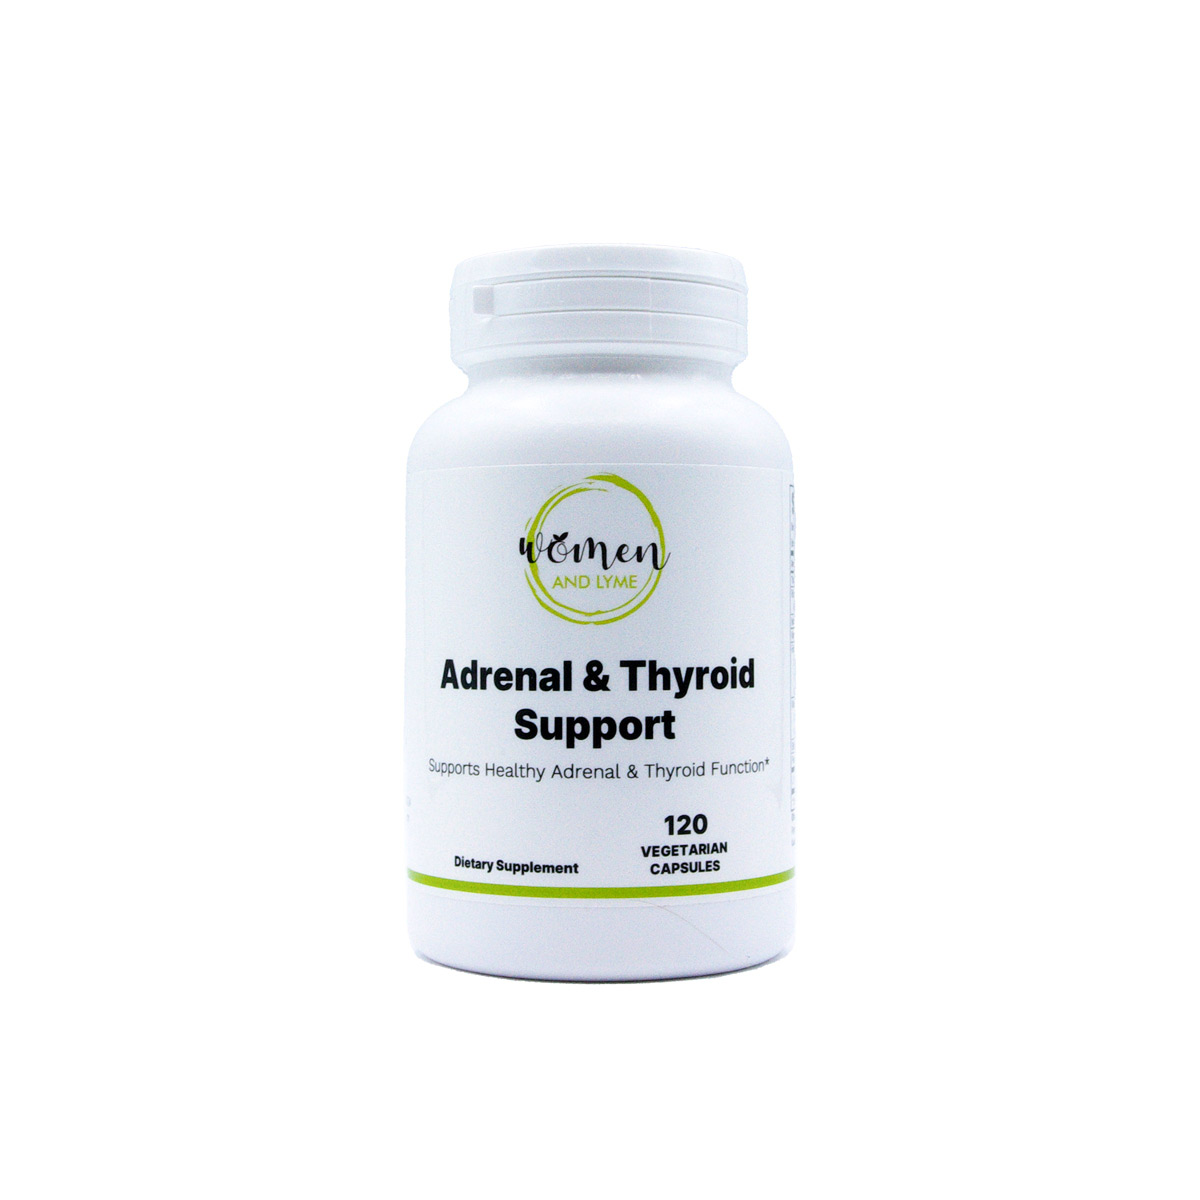 Adrenal and Thyroid Support